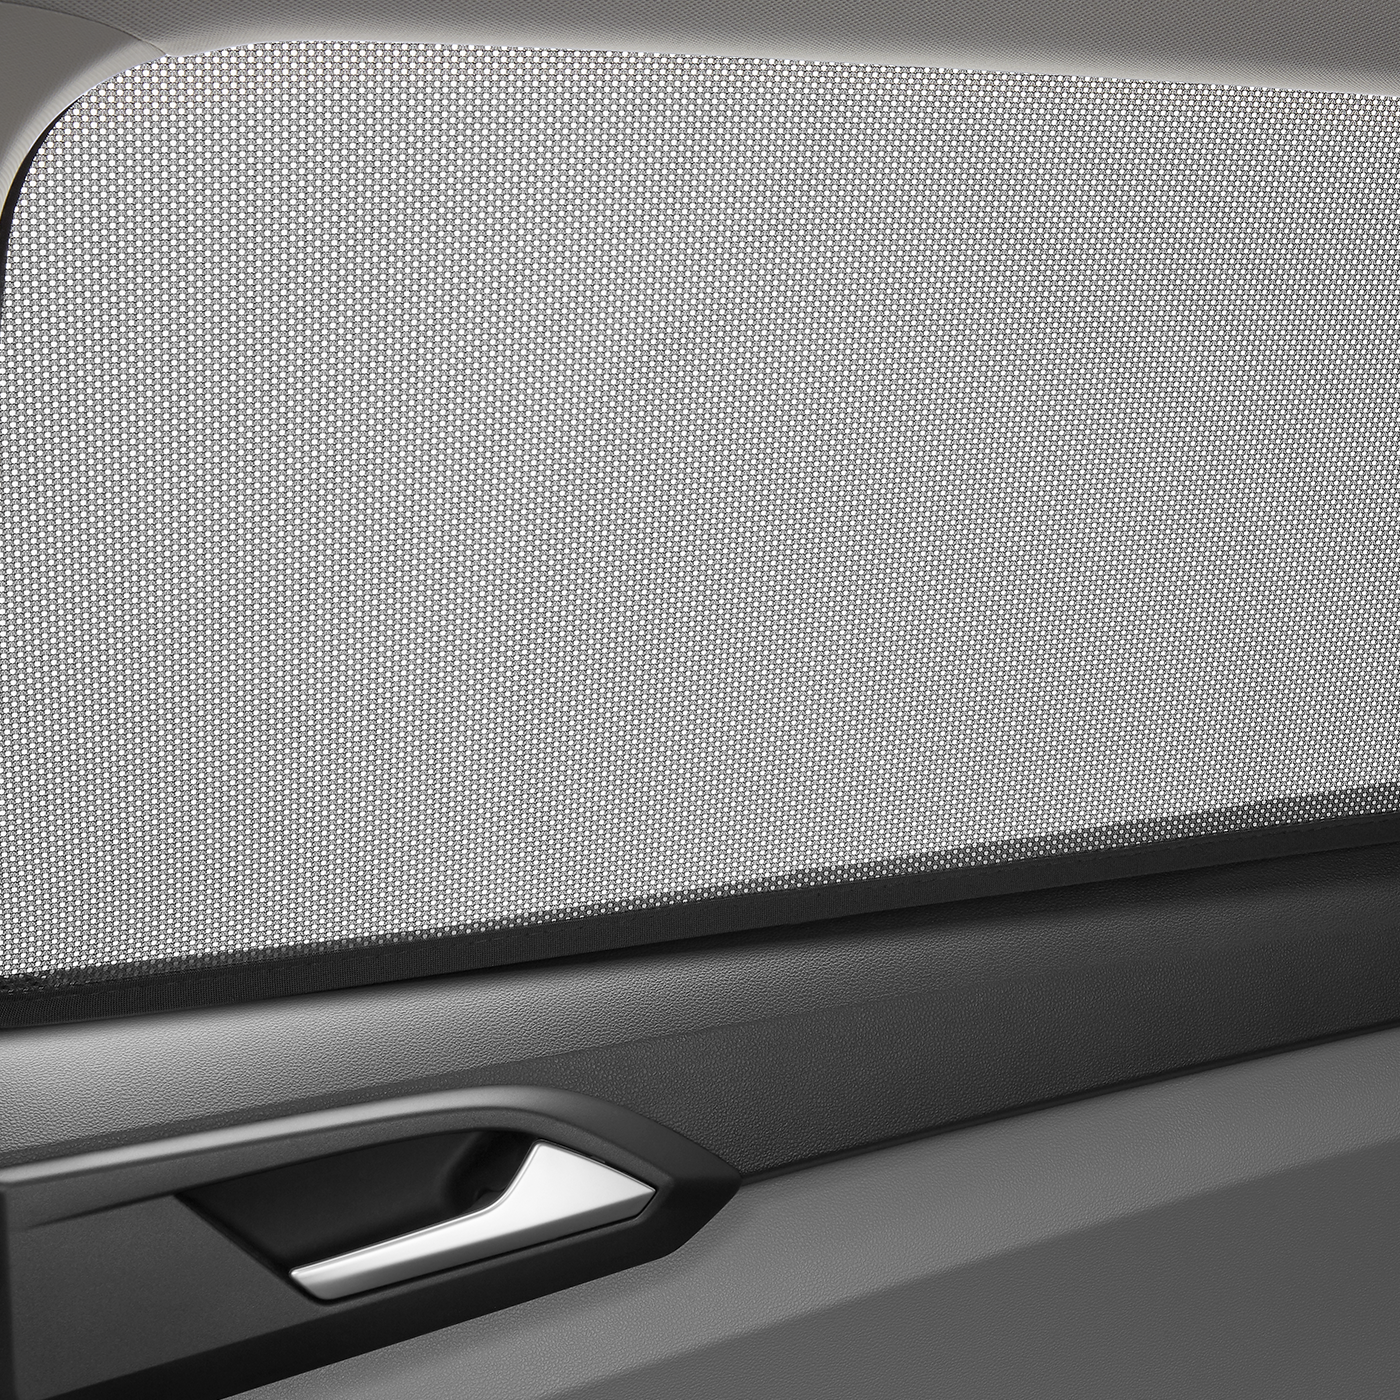 VW Rear Sunshades | VW Service and Parts